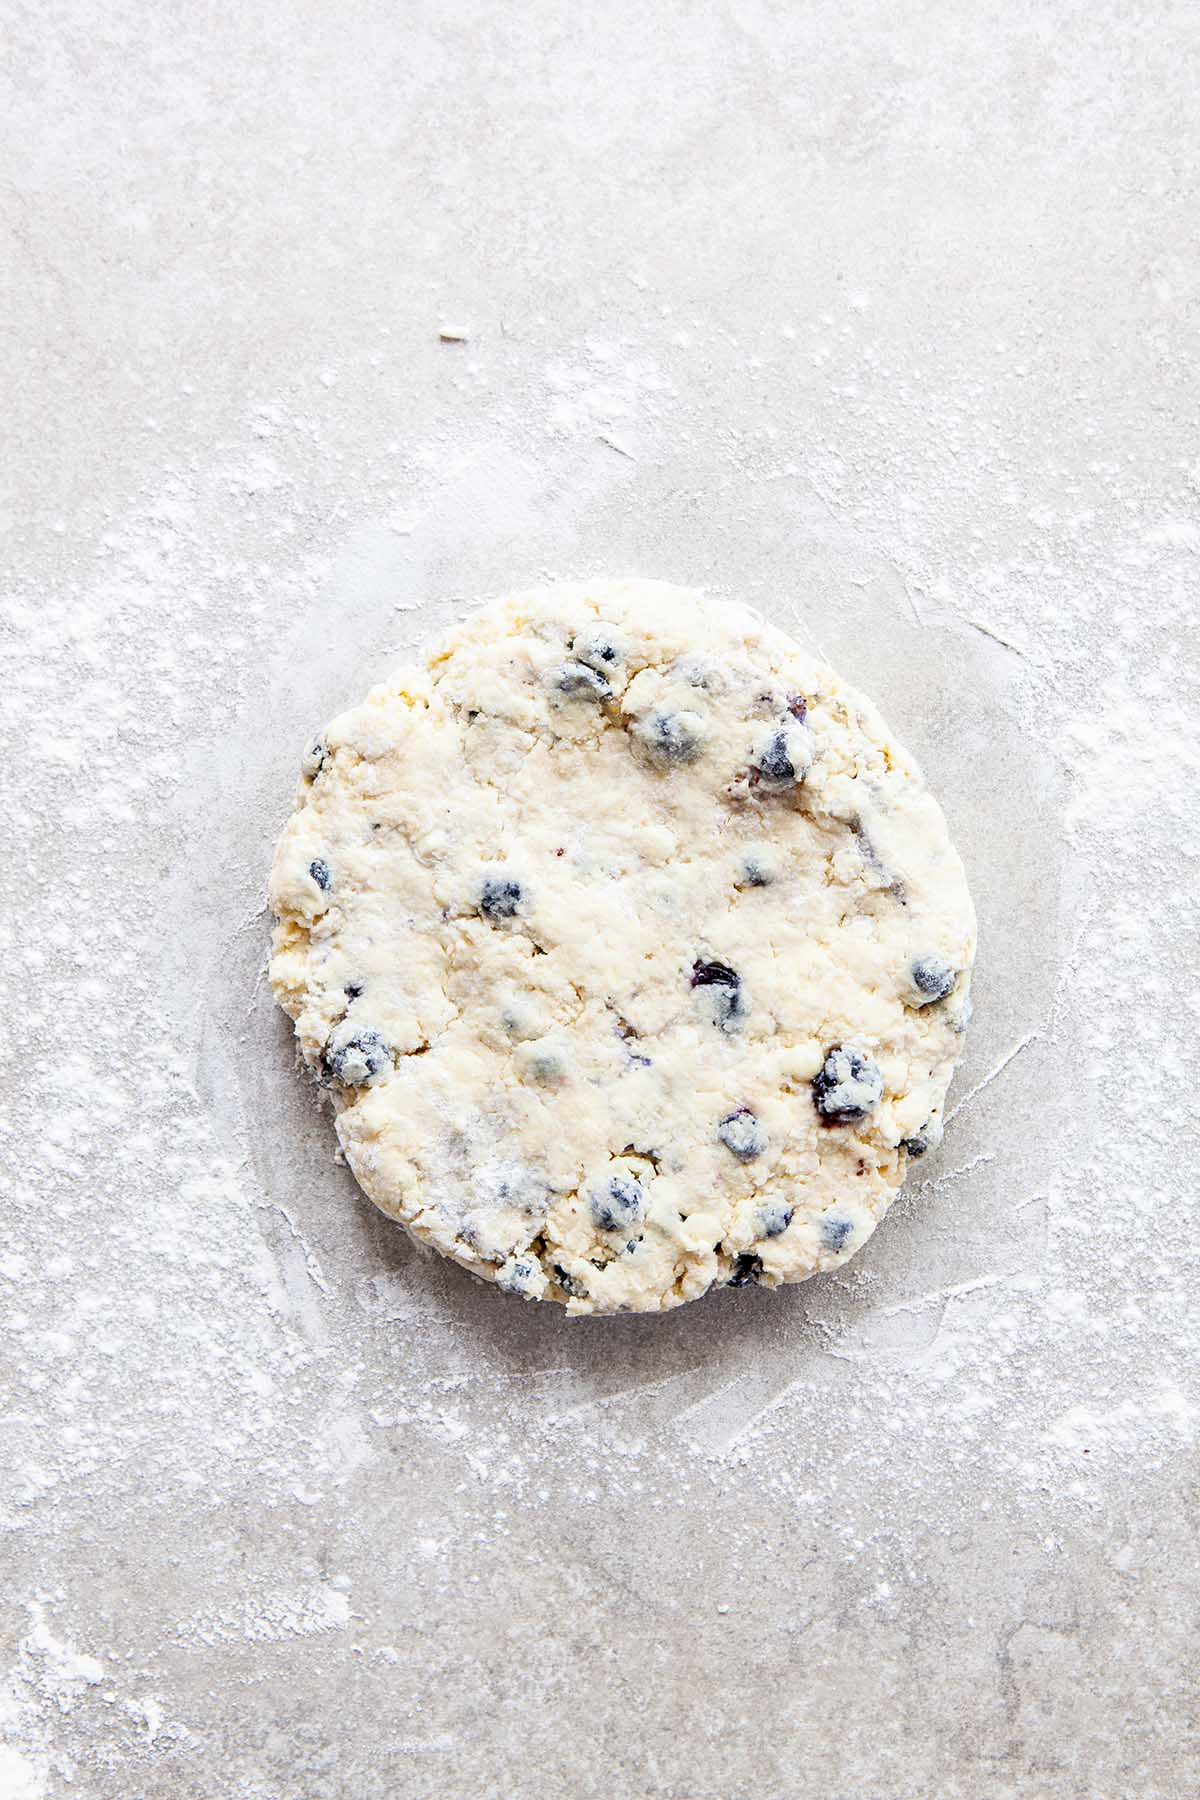 A round disc of unbaked scone dough on a floured stone surface.